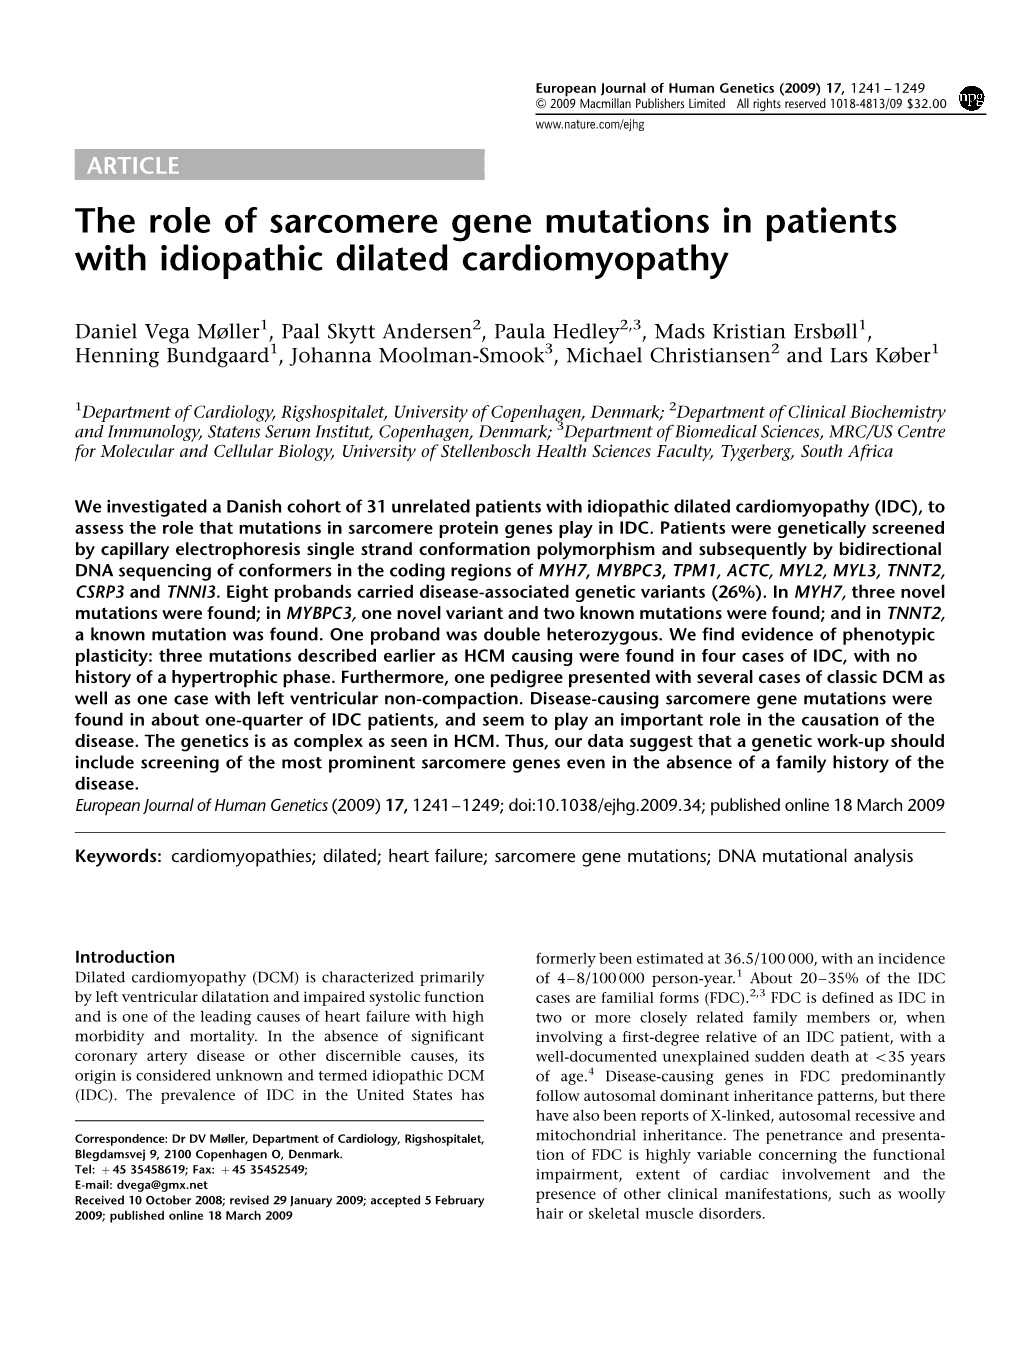 The Role of Sarcomere Gene Mutations in Patients with Idiopathic Dilated Cardiomyopathy